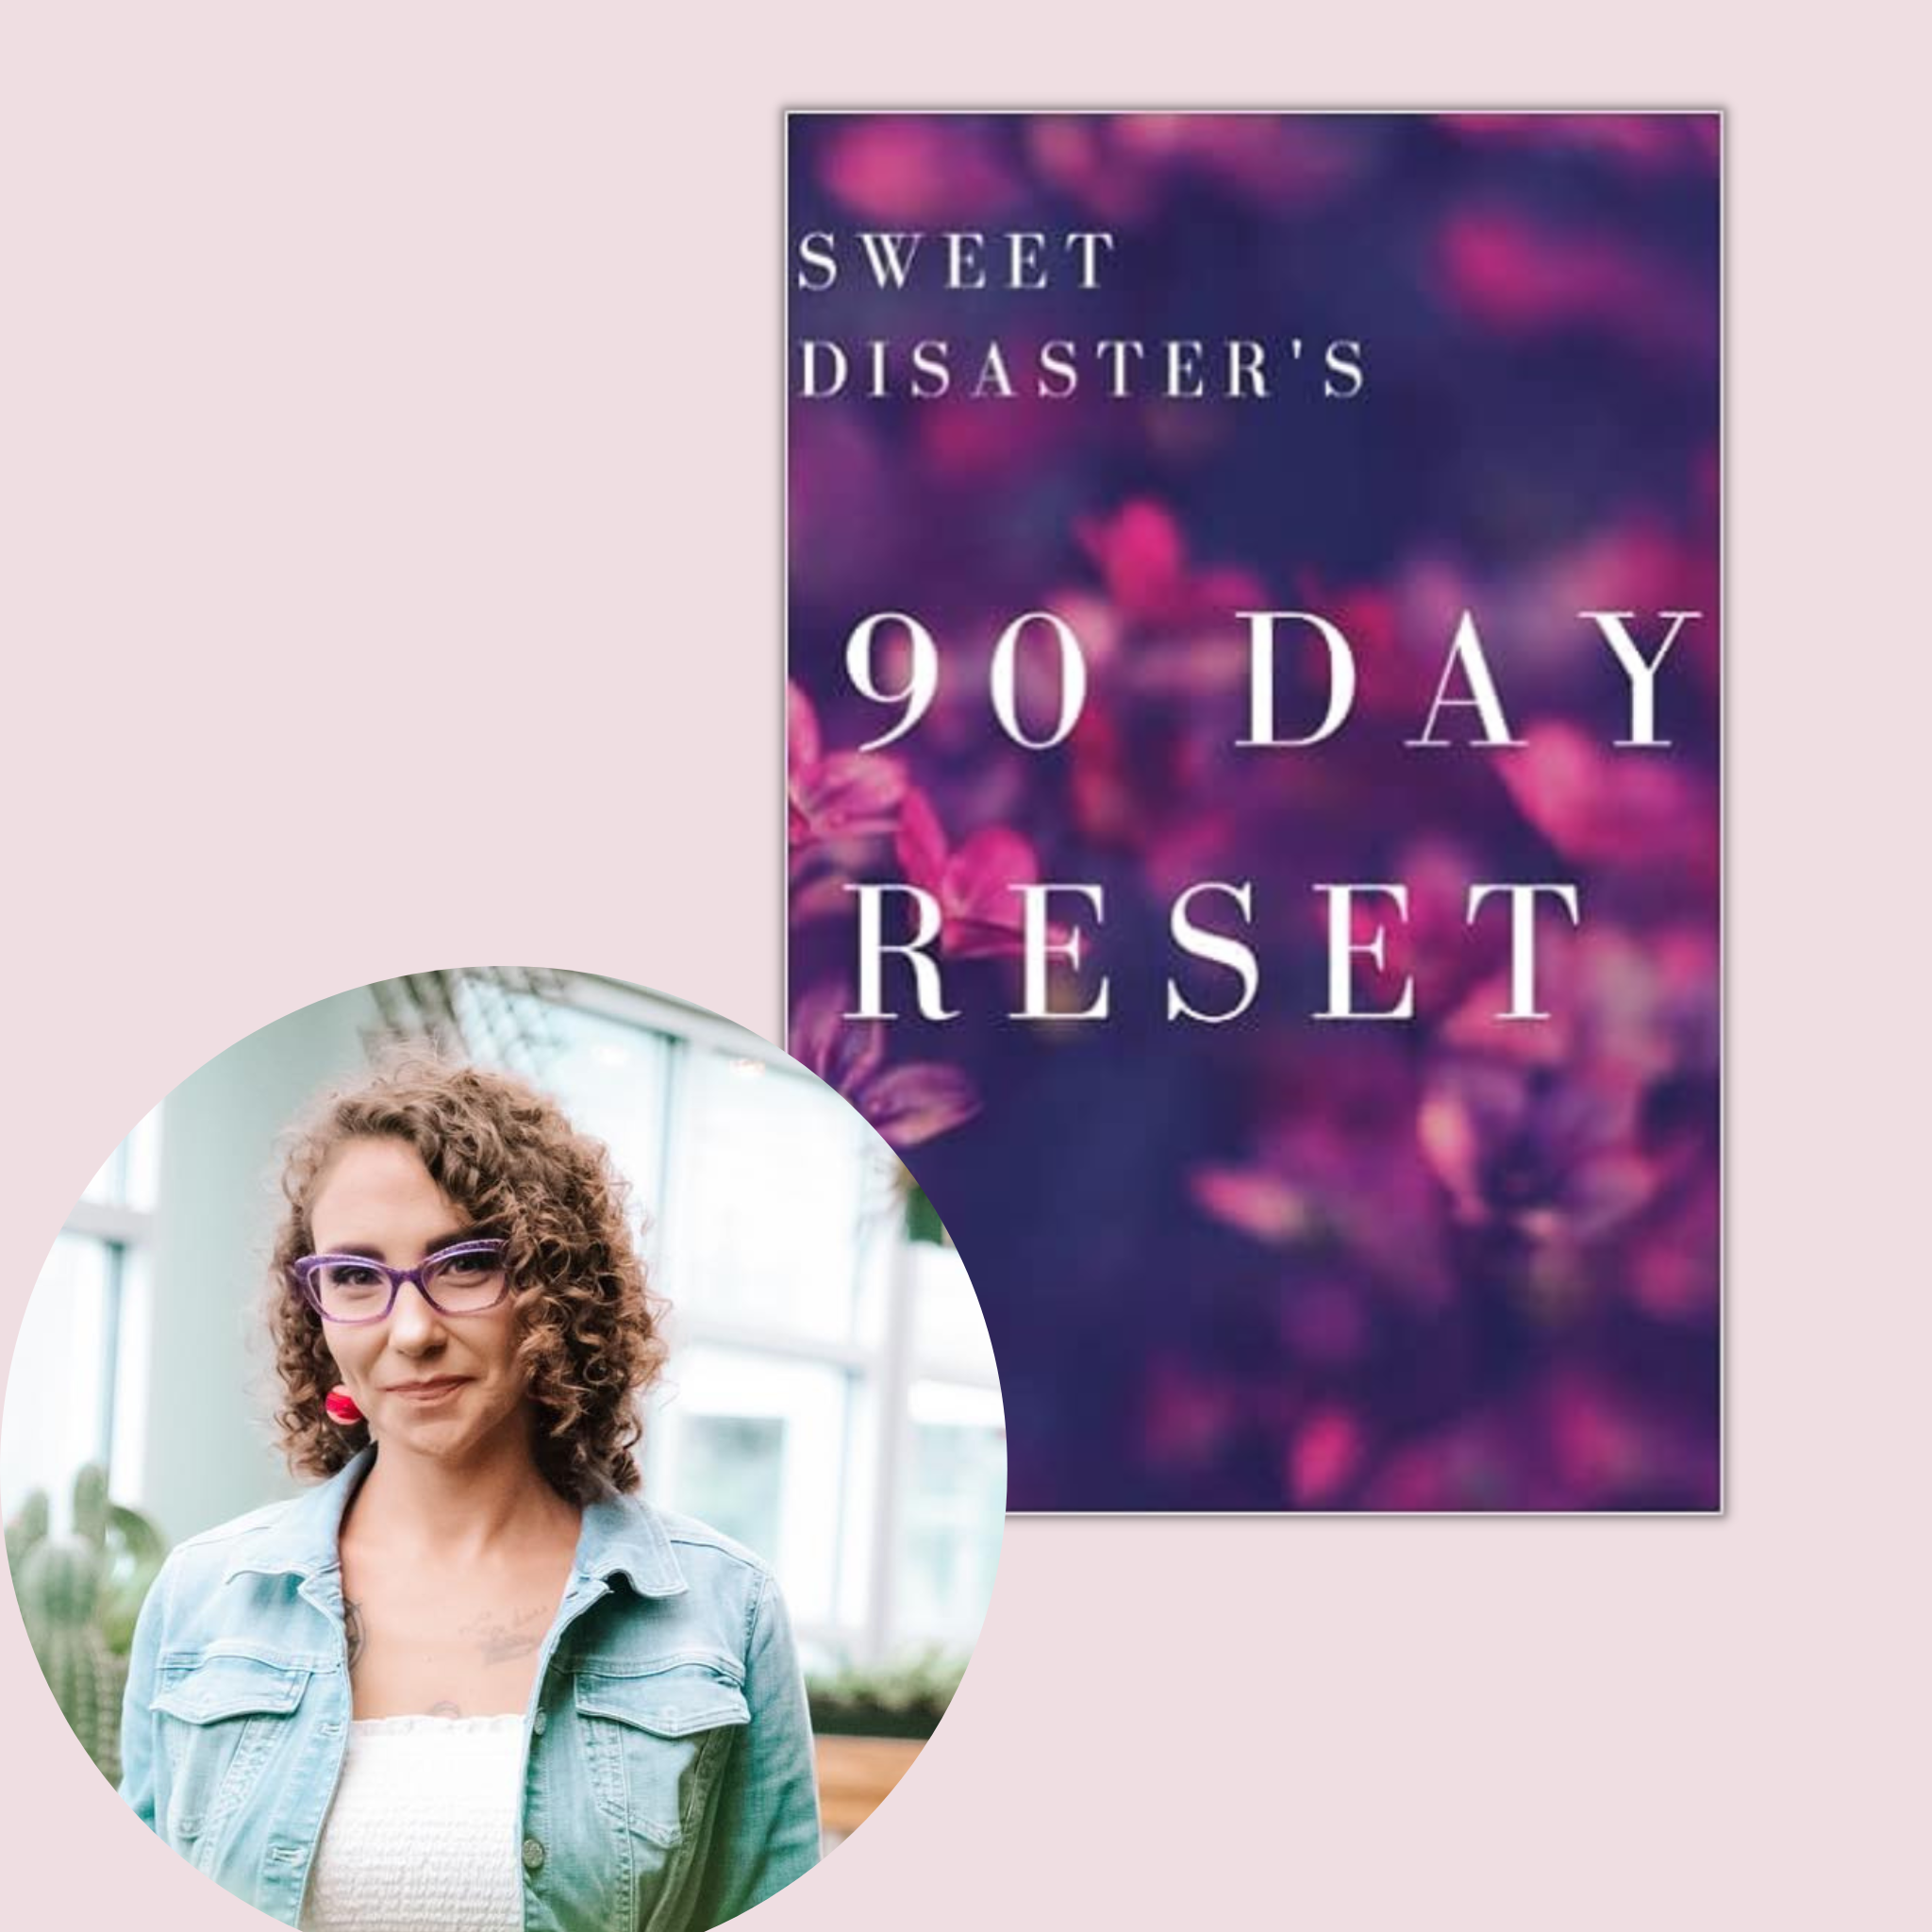 Stephanie Polcyn's self published book "Sweet Disaster's 90 Day Reset" self published and sold through Amazon KDP and Kindle Direct Publishing